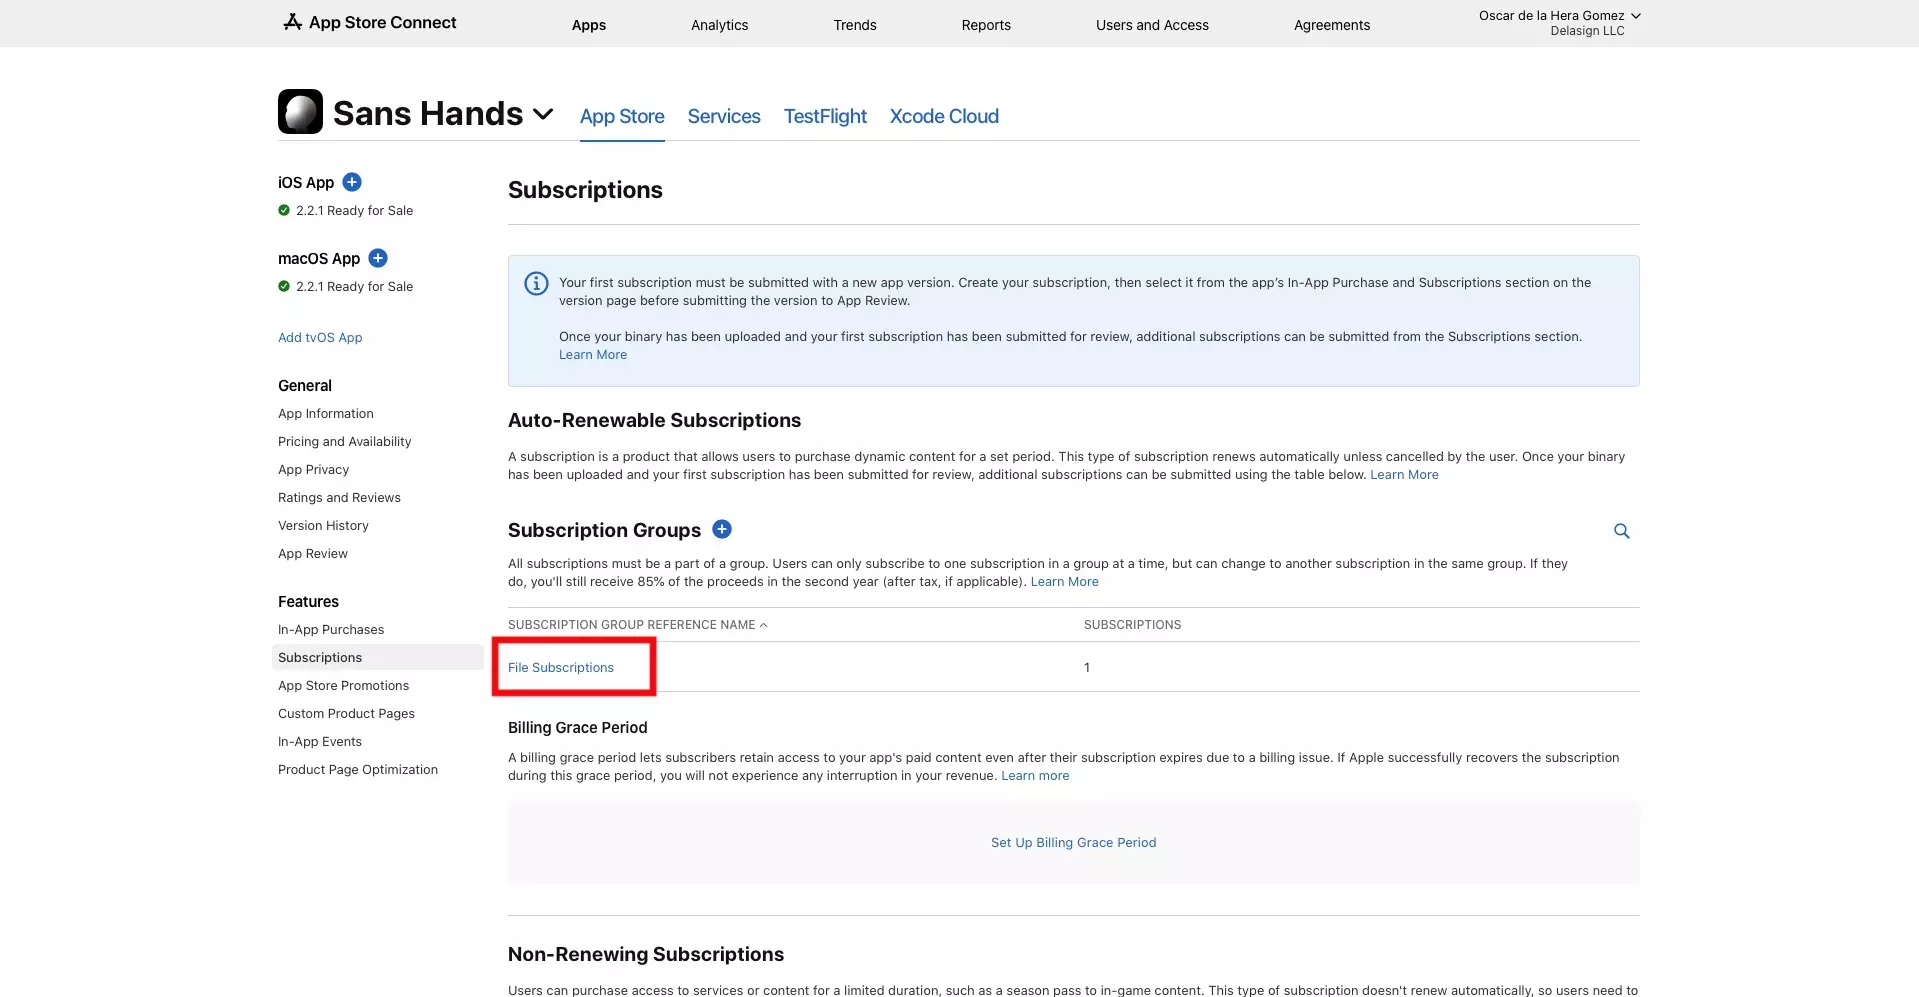 A screenshot of the App Store Connect Subscriptions Page, with a highlight on a reference name for a subscription group. Select a Subscription Group Reference Name, to access that Subscription Group.